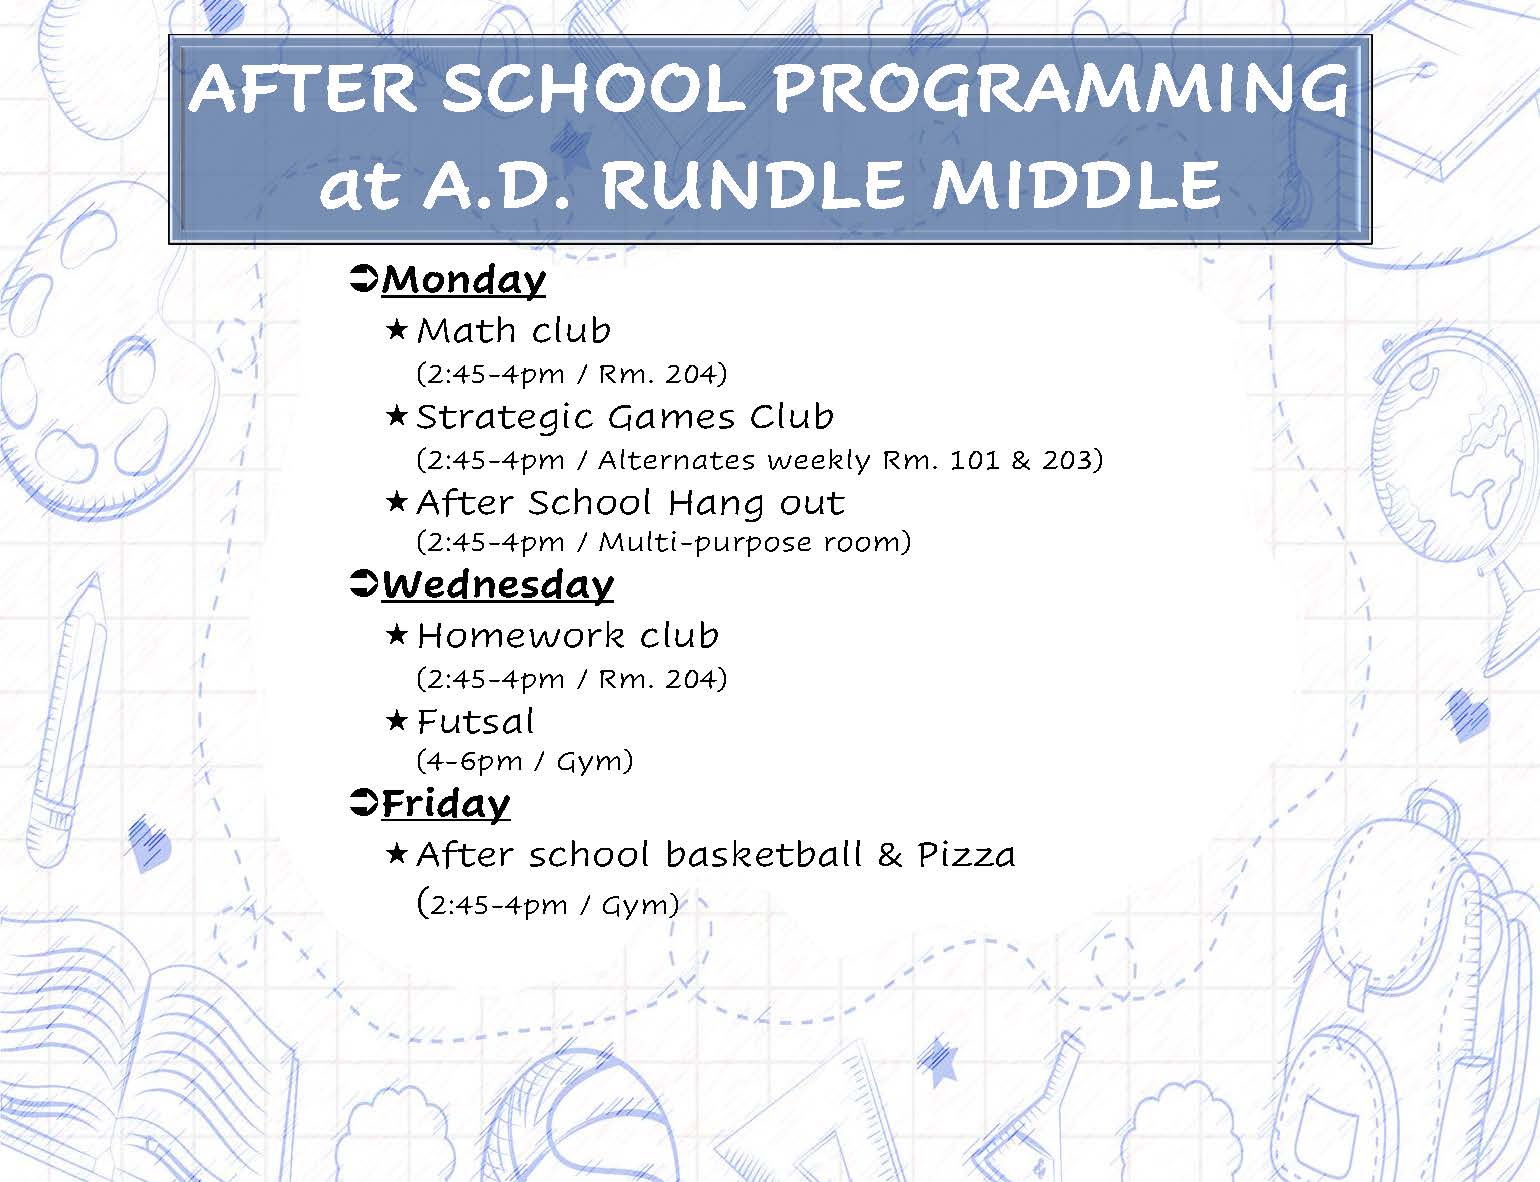 Image of the AD Rundle Middle School After School Program Brochure